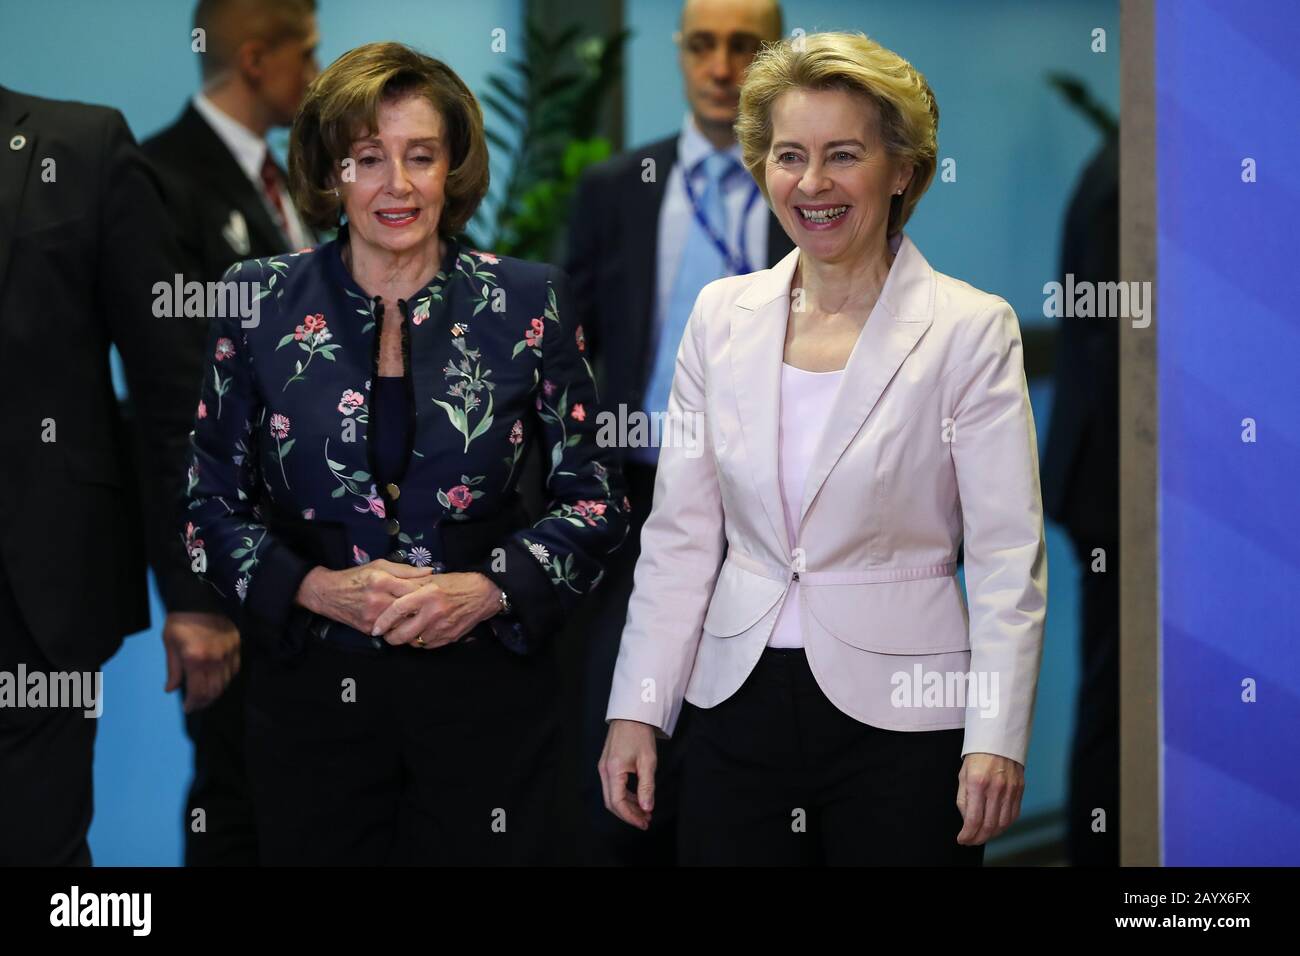 Brussels, Belgium. 17th Feb, 2020. European Commission President Ursula Von der Leyen (R) welcomes U.S. House Speaker Nancy Pelosi as the latter pays a visit to the EU headquarters in Brussels, Belgium, Feb. 17, 2020. Credit: Zhang Cheng/Xinhua/Alamy Live News Stock Photo